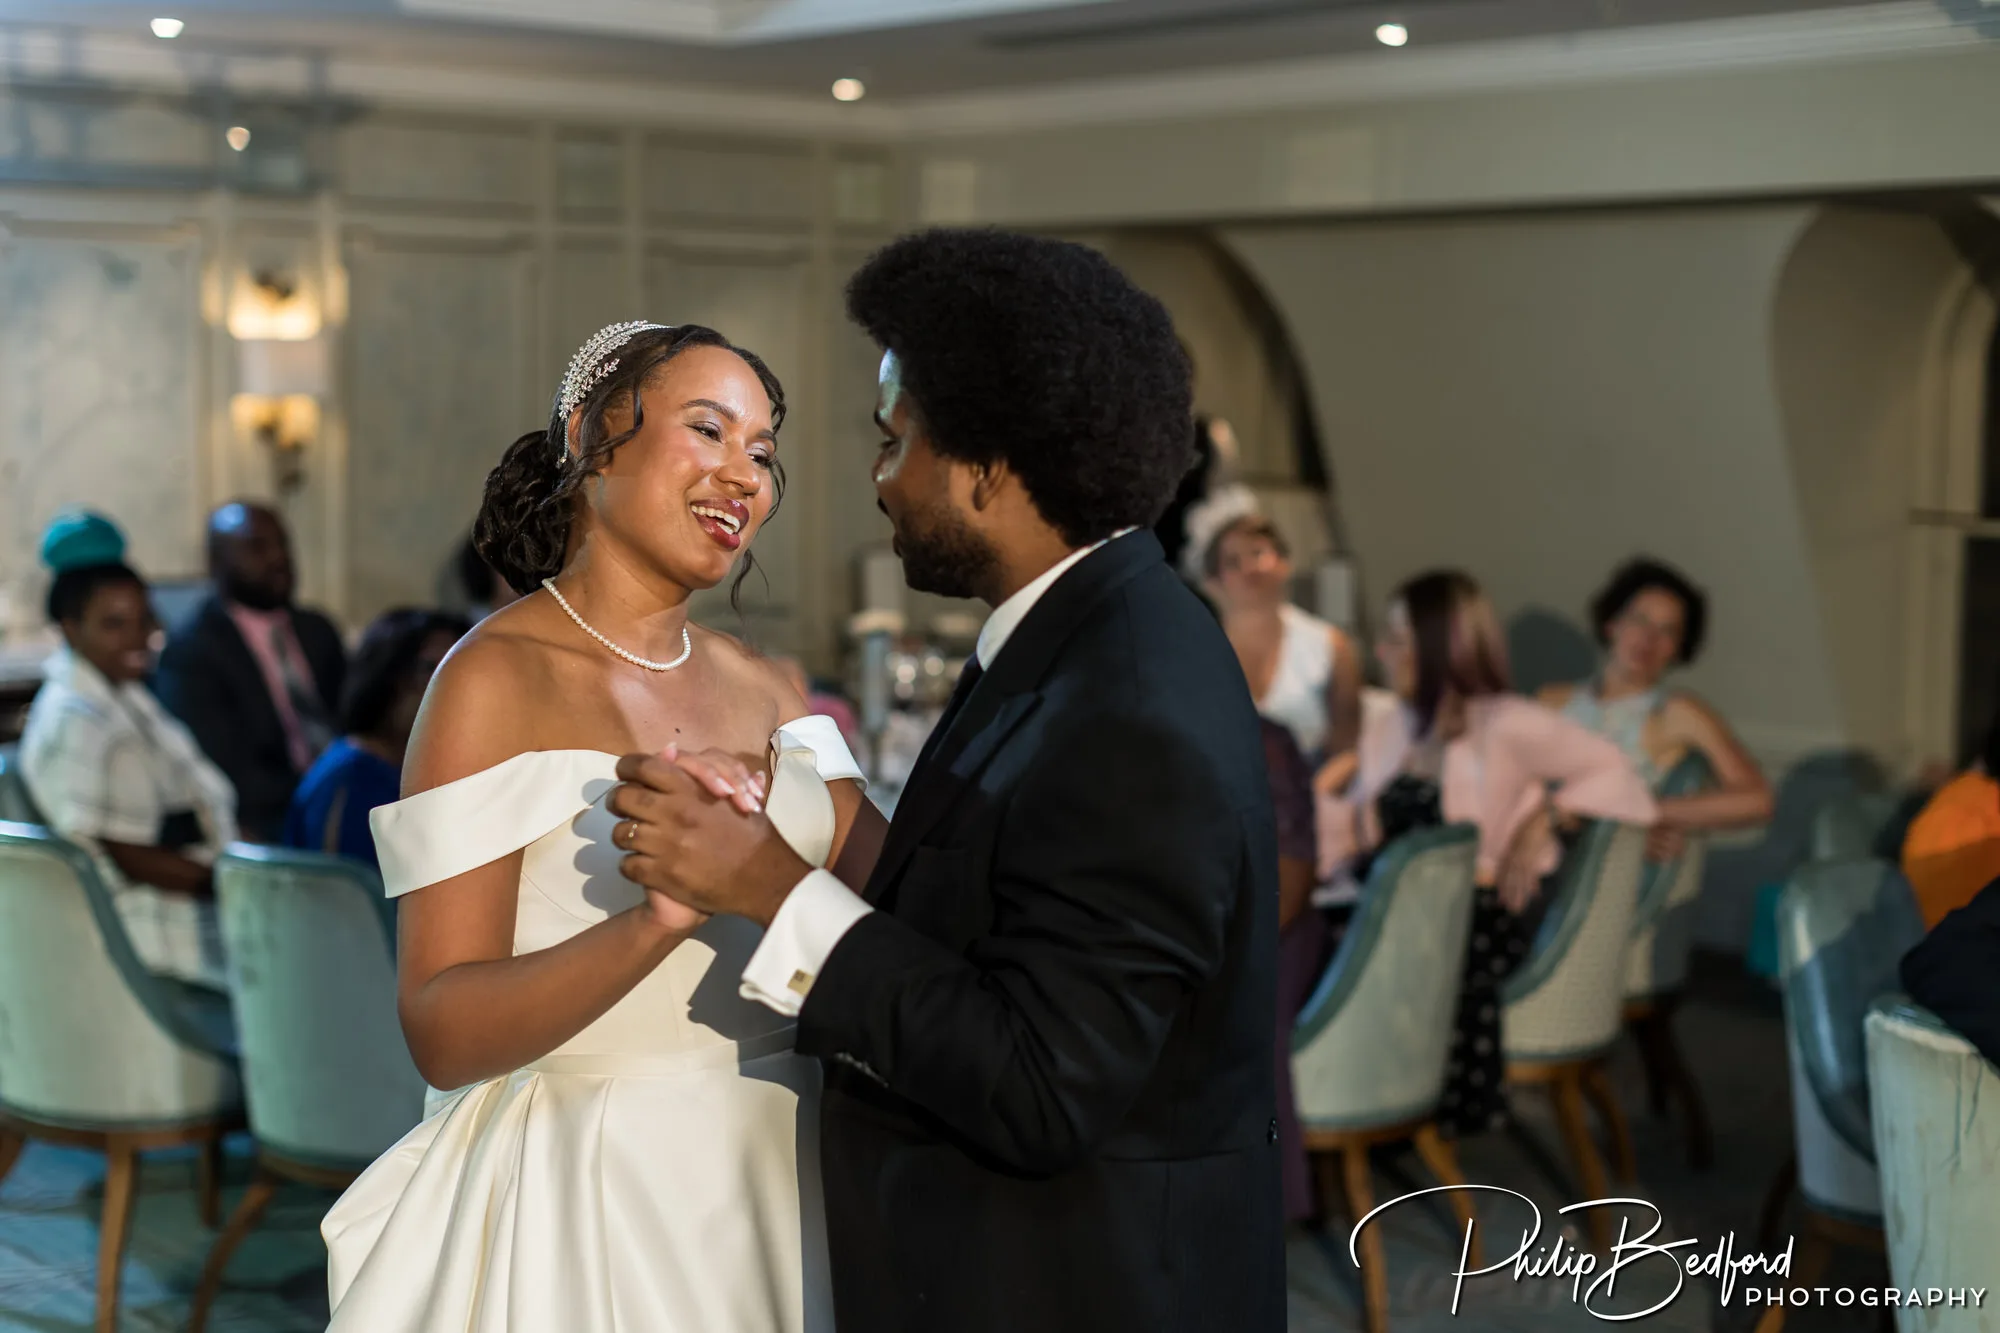 Fortnum & Mason Wedding - the bride and groom share their first dance together